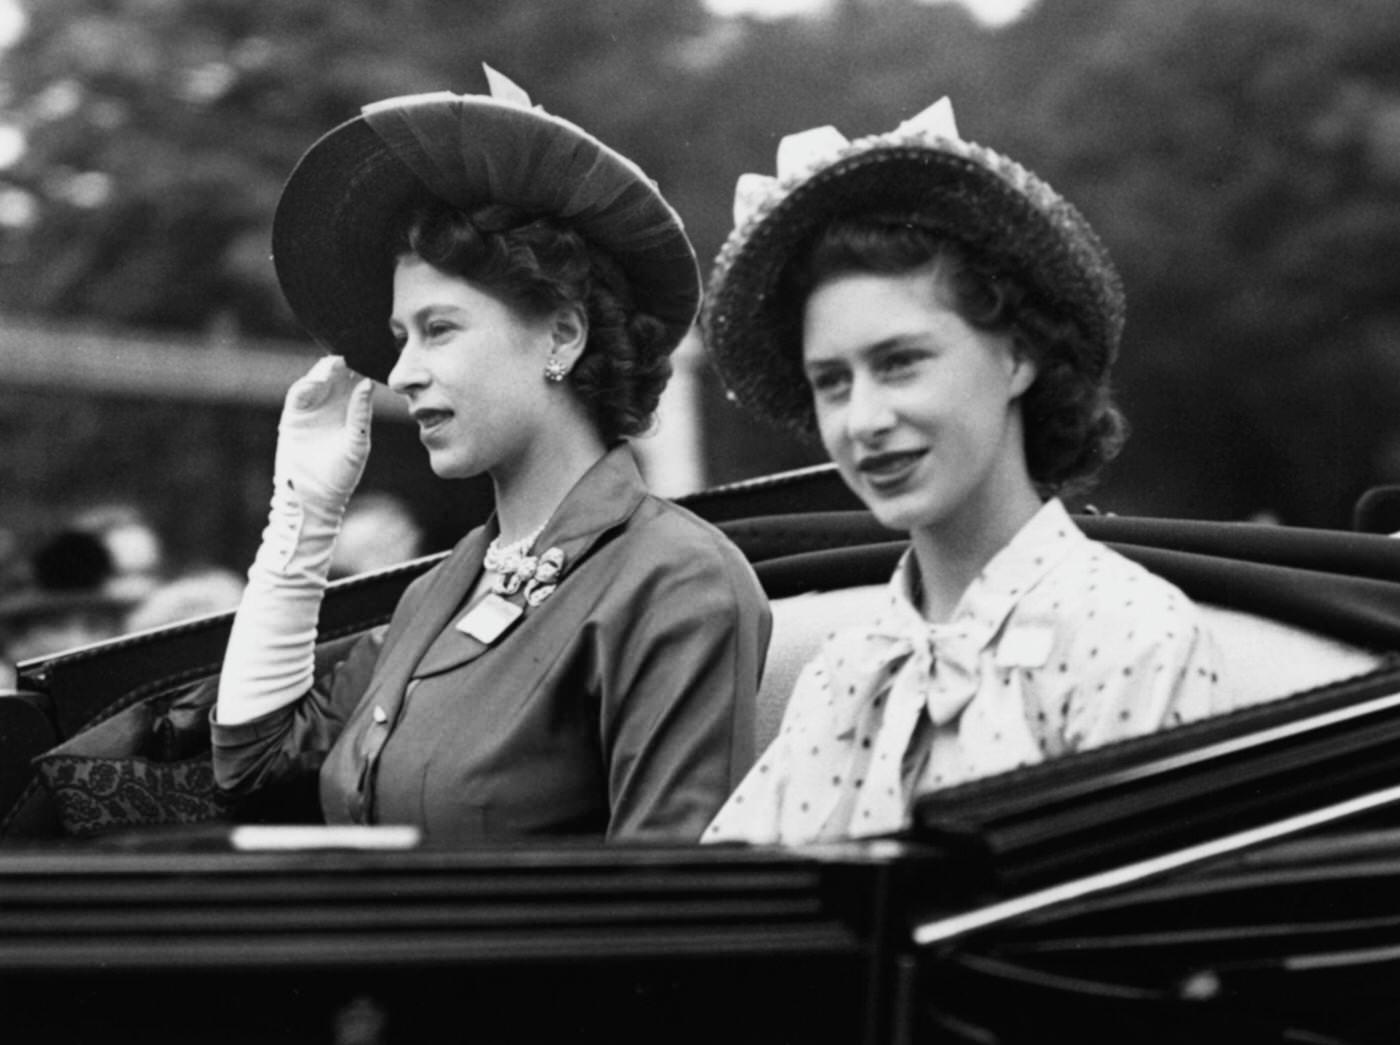 Princesses Elizabeth and Margaret drive in an open carriage to the Royal box at Ascot Racecourse to watch the running of the Gold Cup race, England, 17 June 1948.